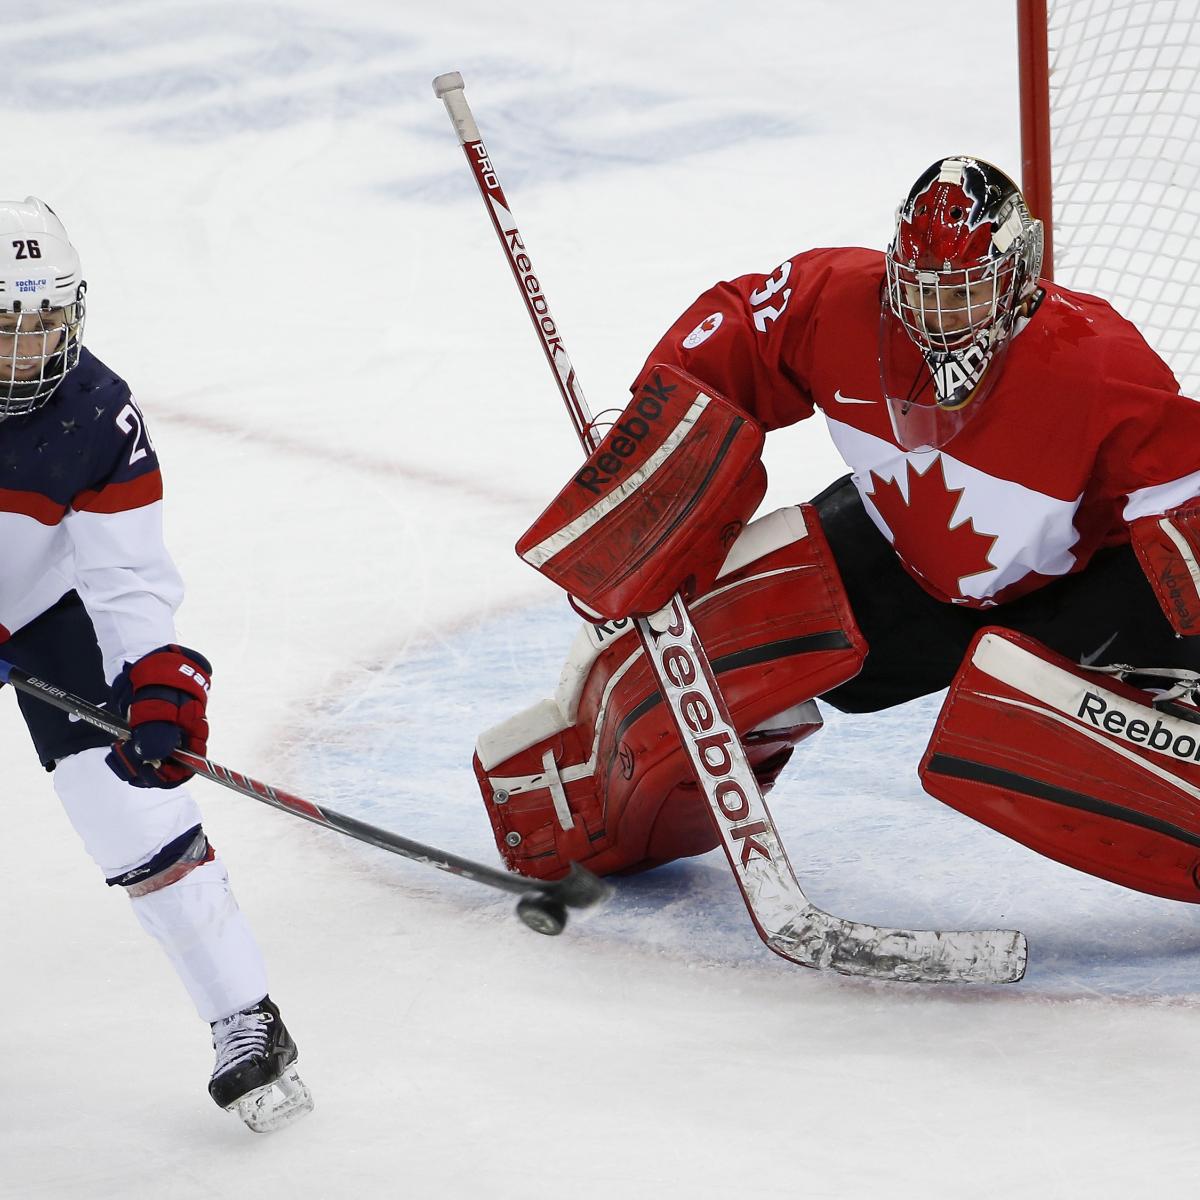 US Olympic Hockey Team 2014: Preview for Men's and Women's Matchups vs. Canada | News, Scores